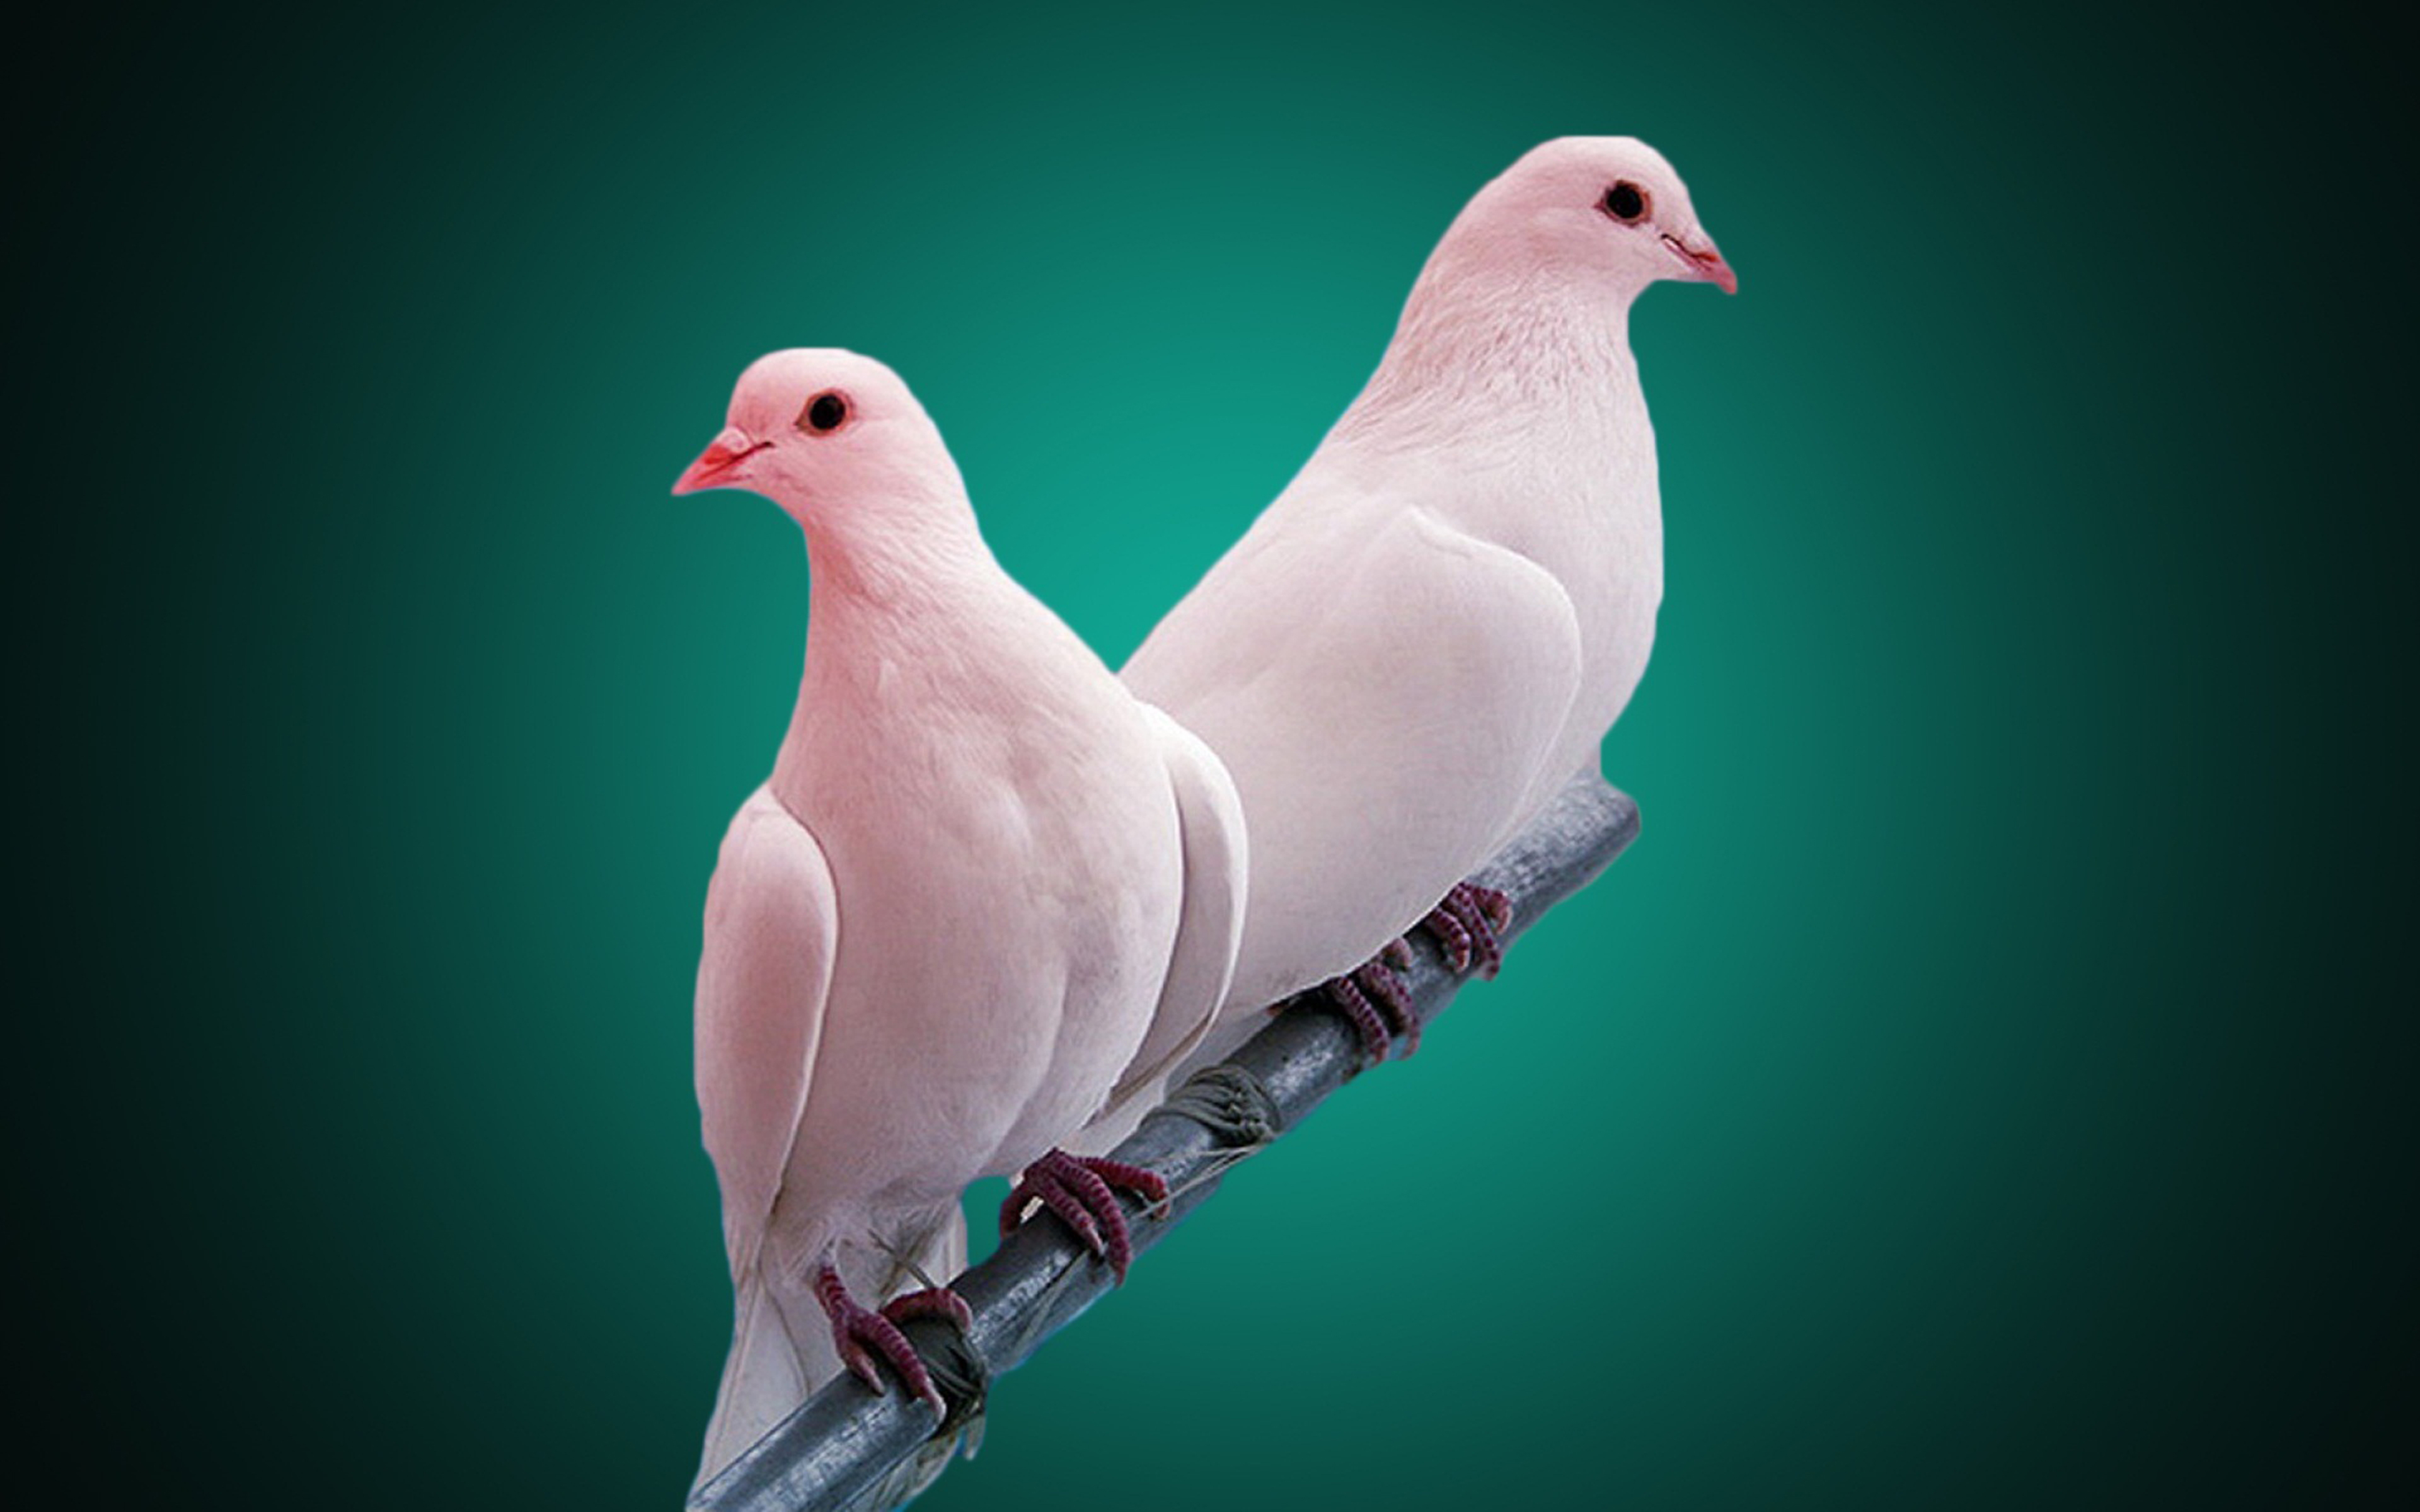 White Pigeon Branch Turquoise Green Wallpaper Hd : 